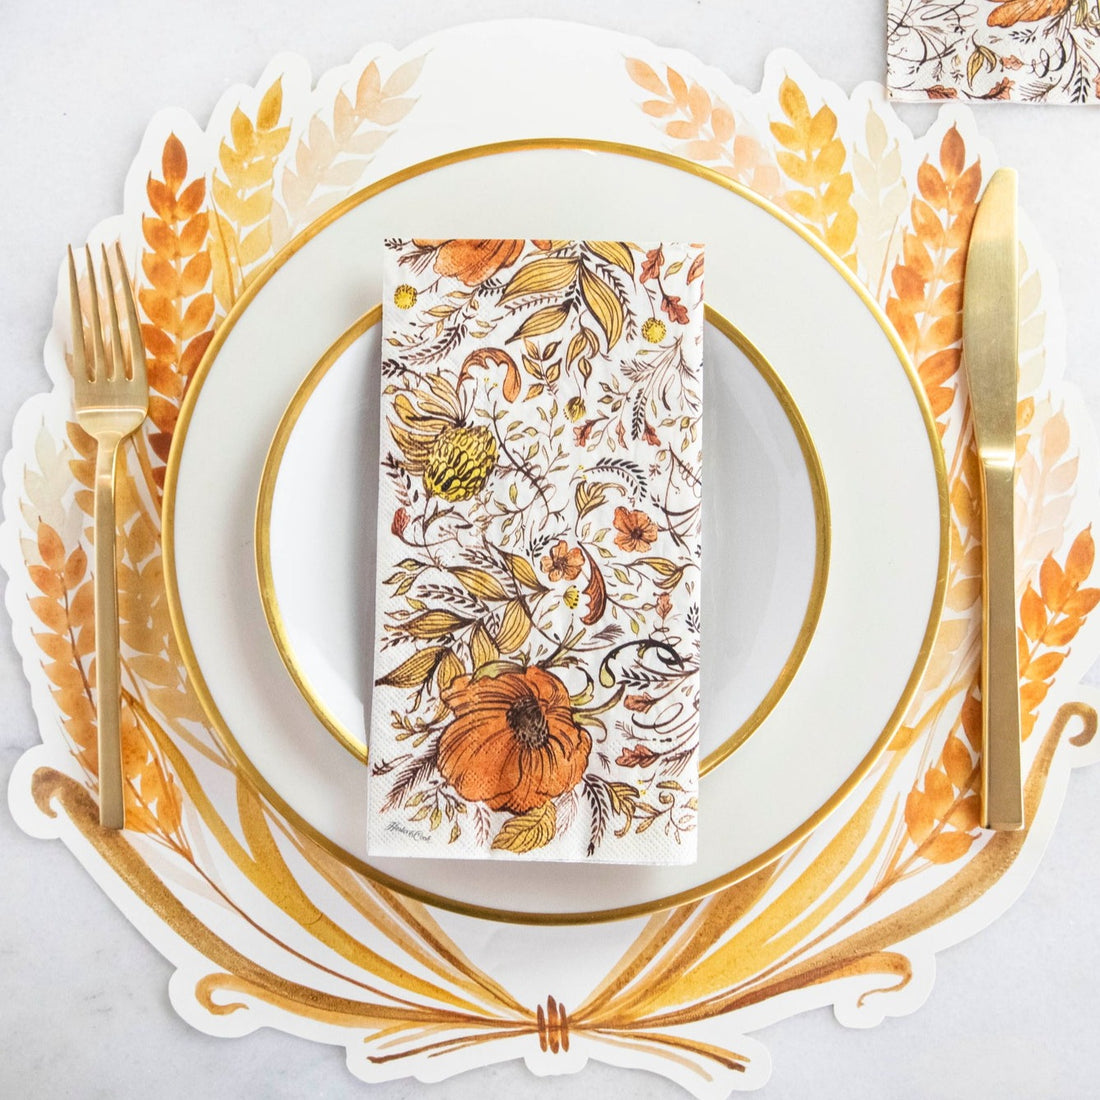 A Hester &amp; Cook Die-cut Golden Harvest Placemat featuring a gold-rimmed plate, gold knife and fork, and corresponding napkin.